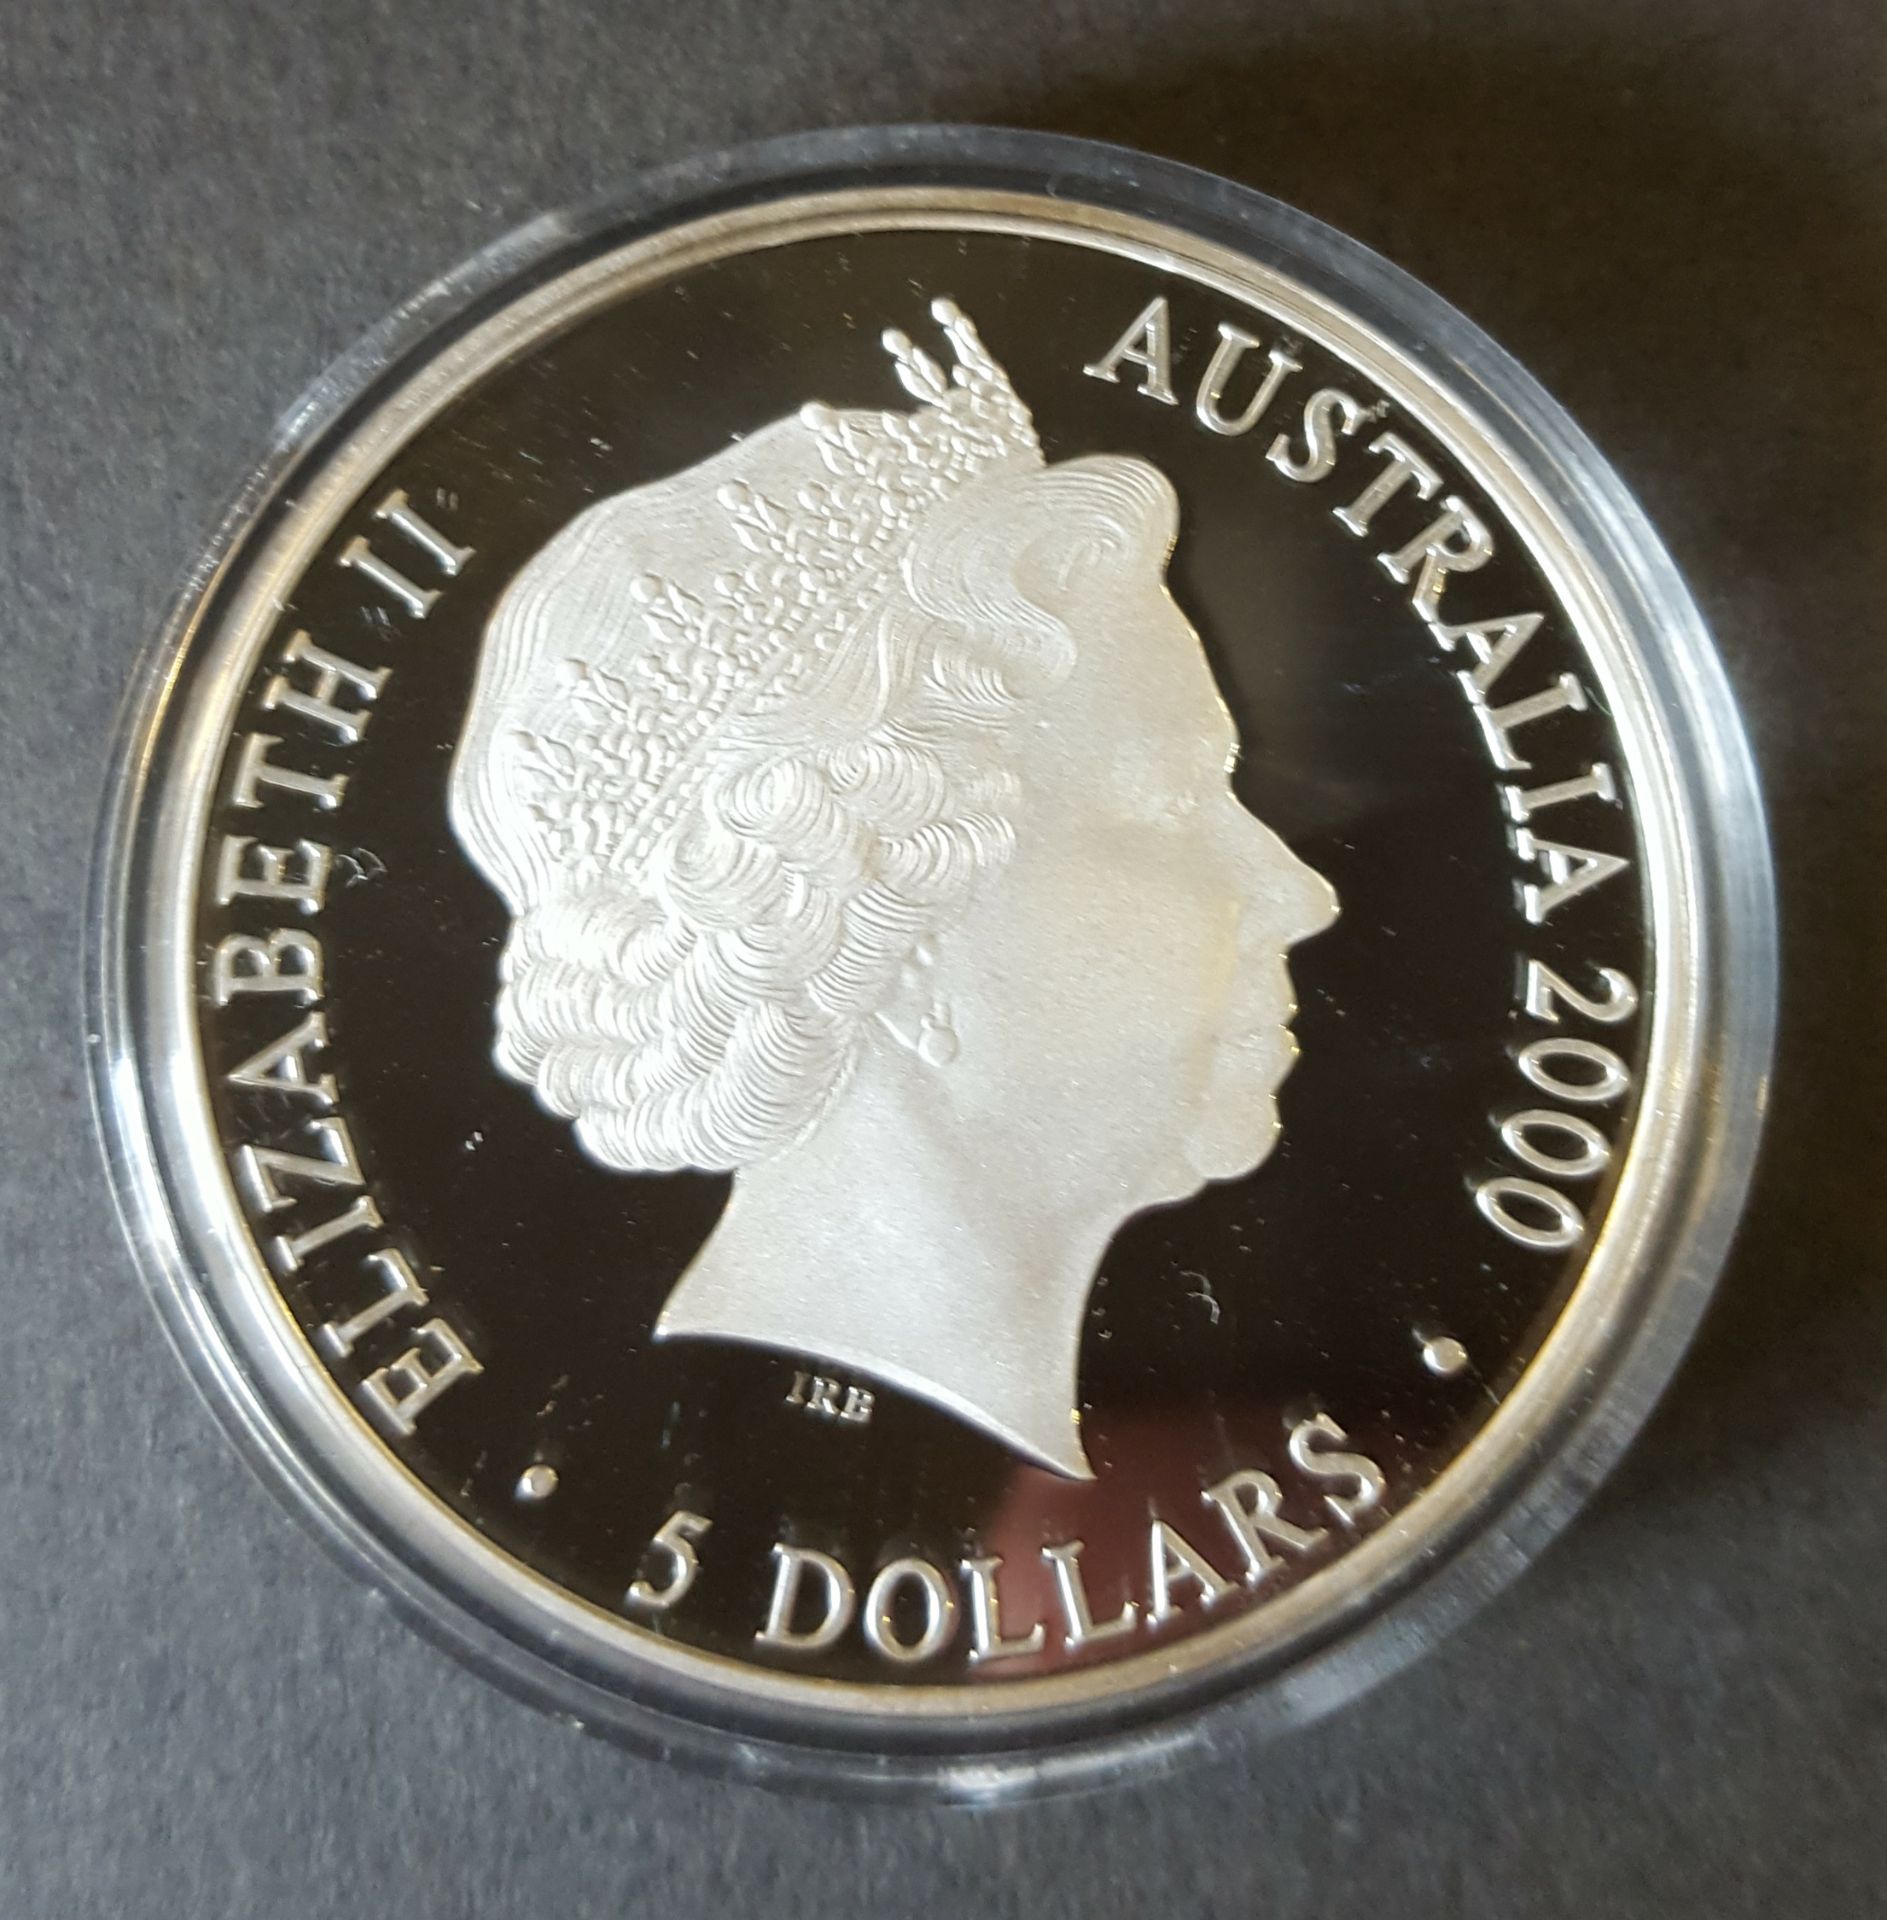 Collectable Proof Coins Silver Royal Australian Mint $5 Olympics 2000 & Perth Mint $1 Kookaburra - Image 2 of 8